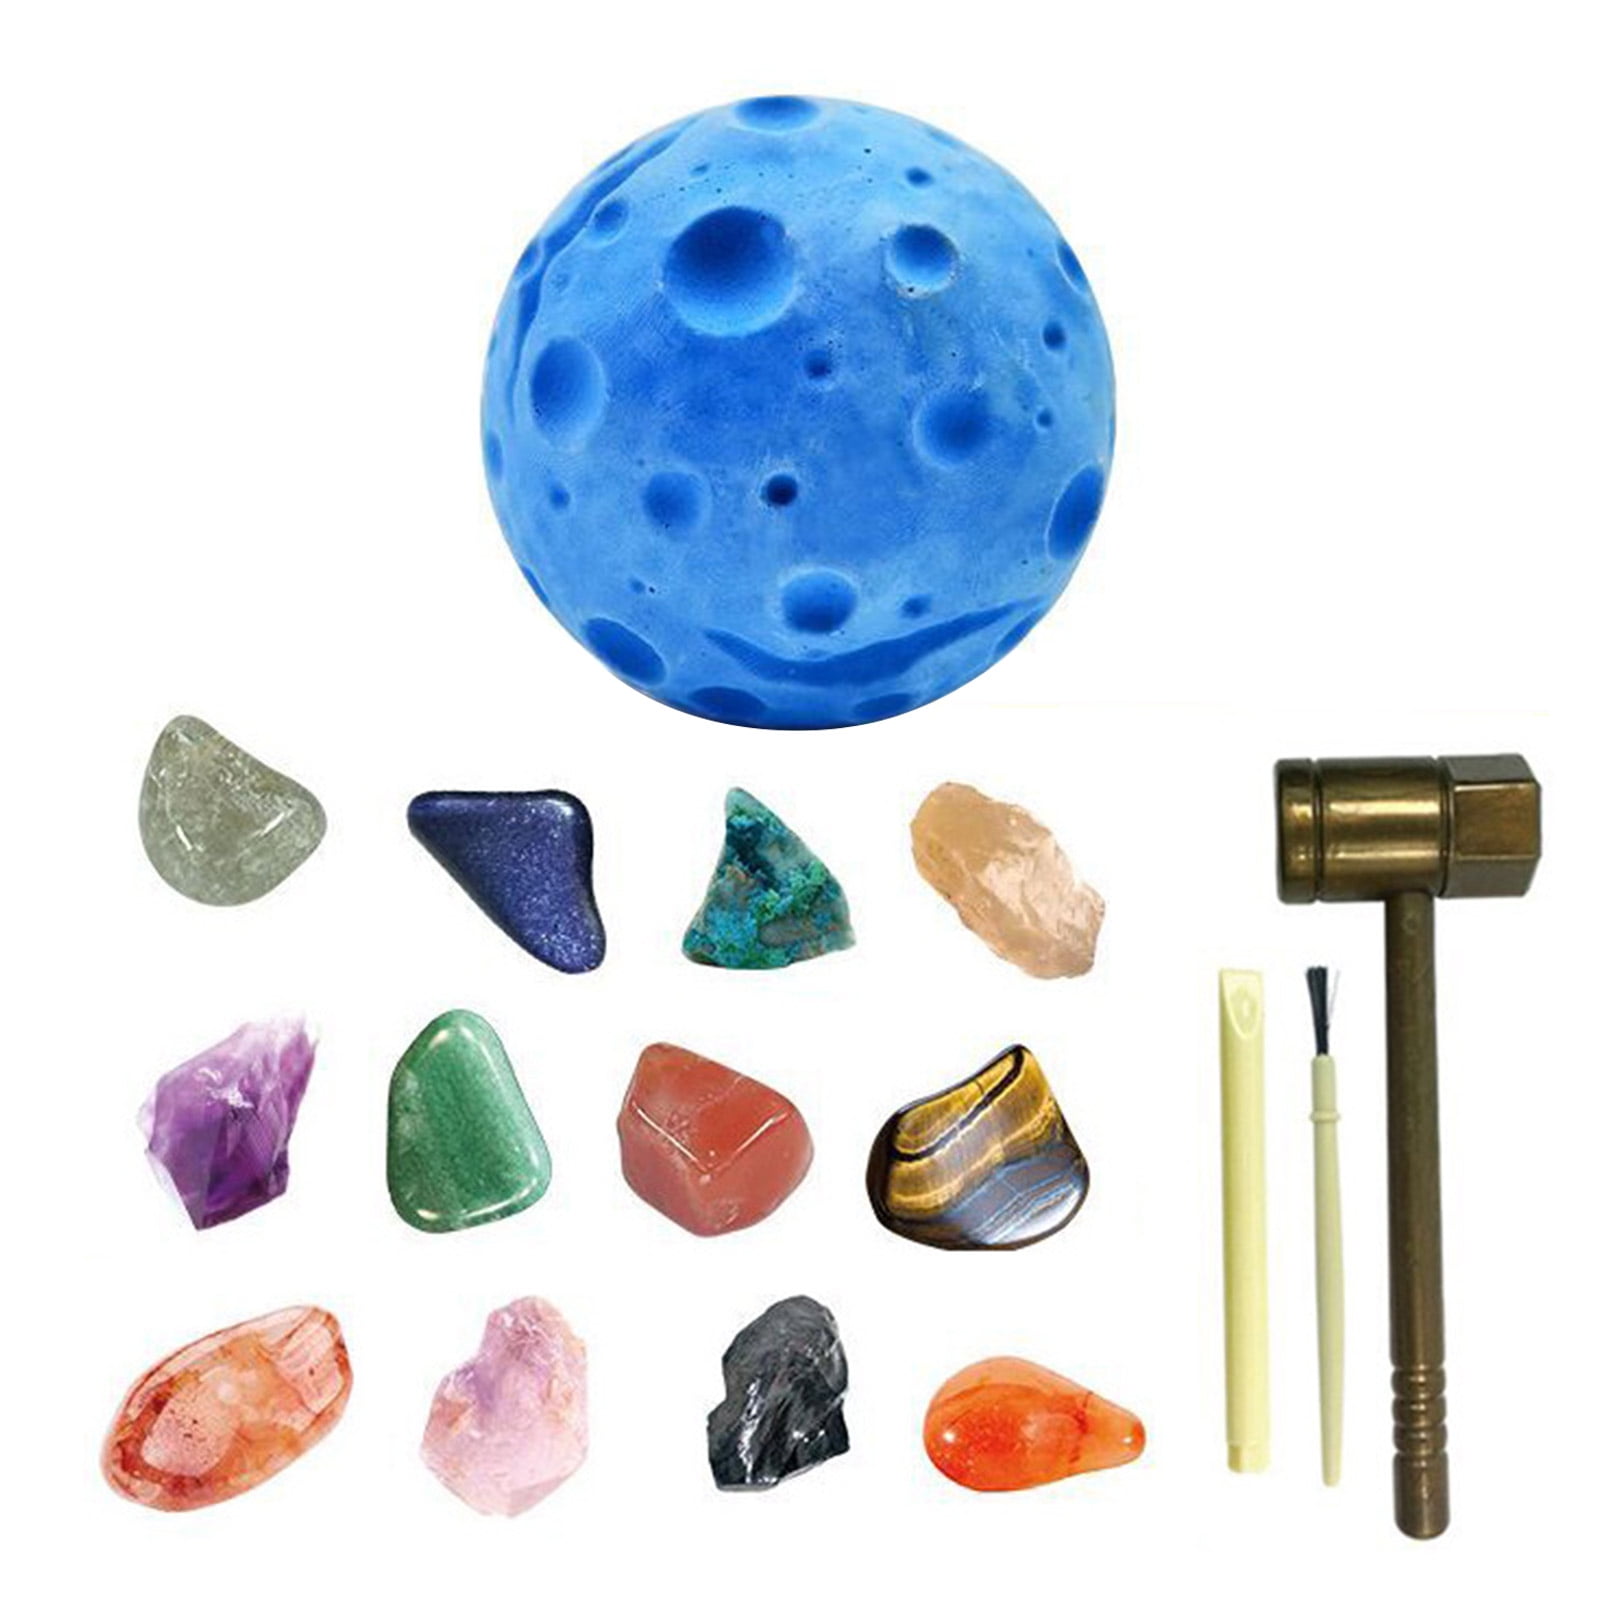 Gems Dig Science Kit STEM Educational Mineral & Rock Collection Real Archaeology Gemstones and Crystals Excavation Toys for Boys Girls 